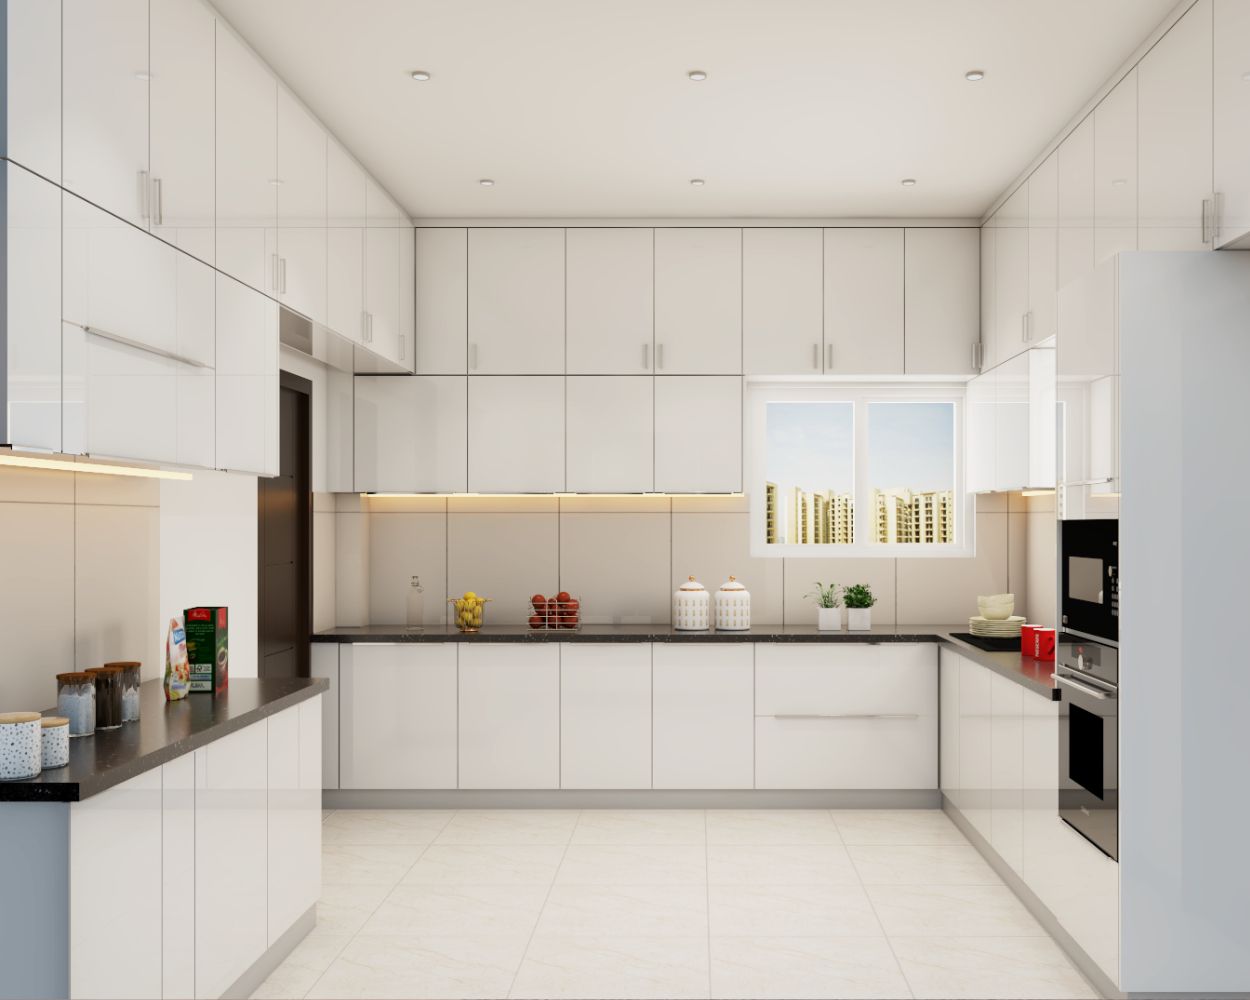 Contemporary Kitchen Design With Glossy White Storage Cabinets